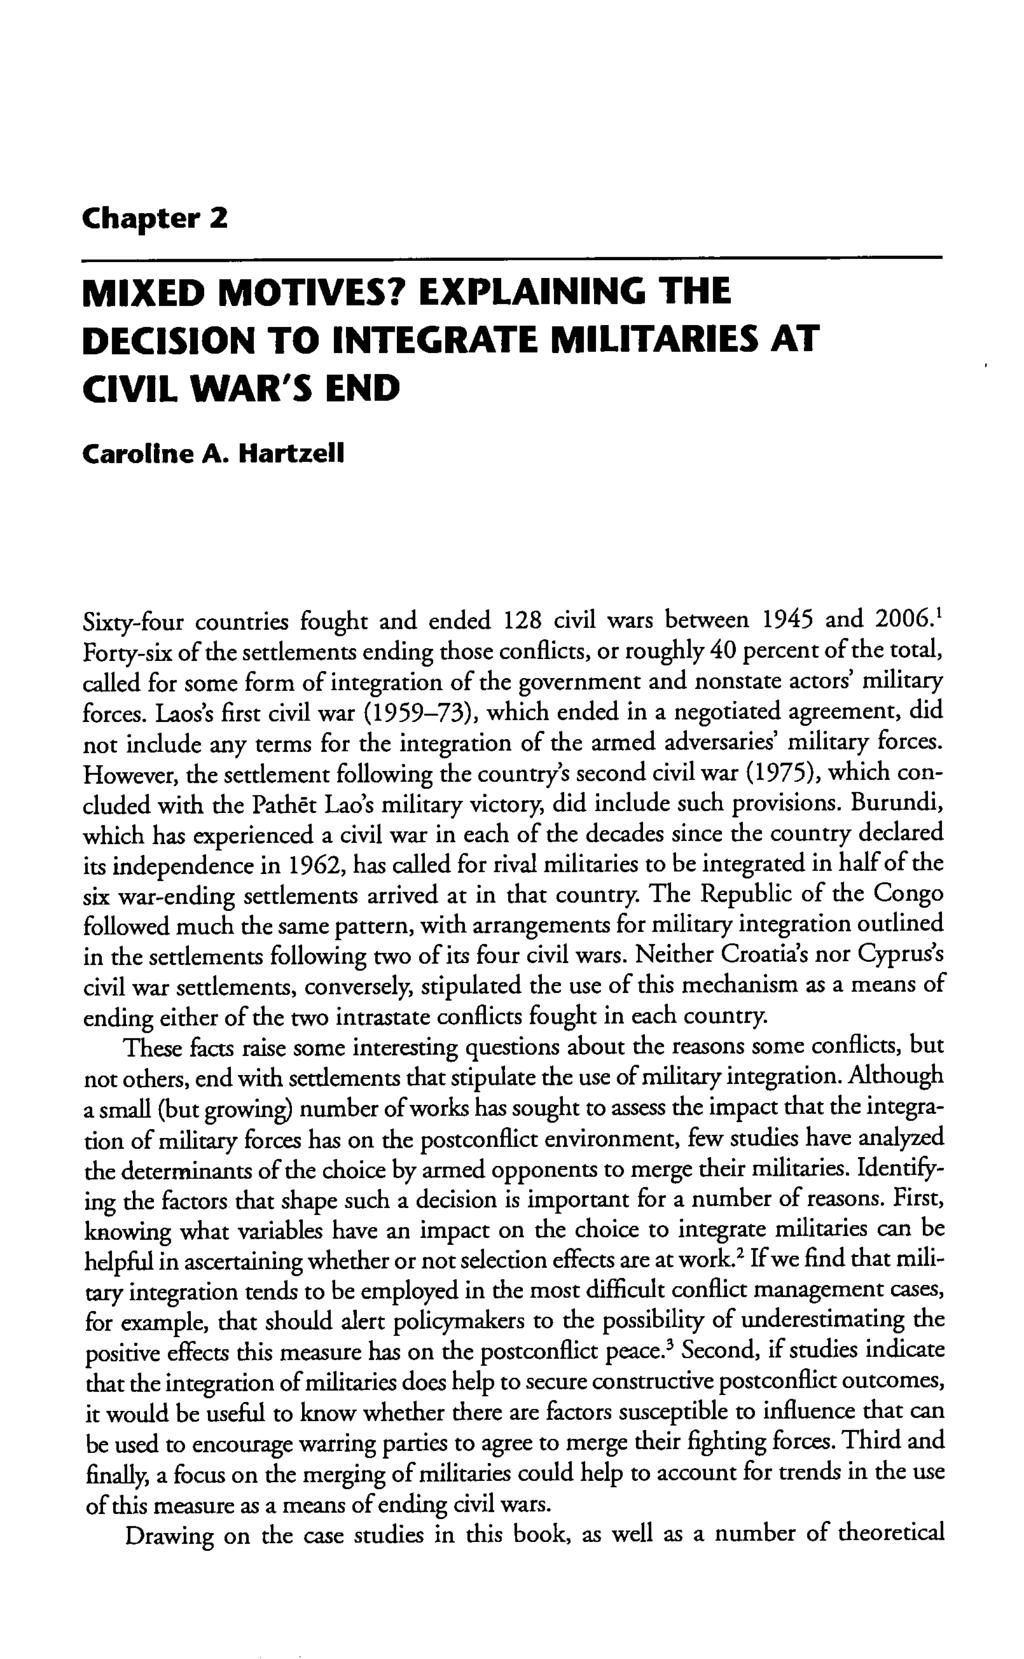 Chapter 2 MIXED MOTIVES? EXPLAINING THE DECISION TO INTEGRATE MILITARIES AT CIVIL WAR'S END Caroline A. Hartzell Sixty-four countries fought and ended 128 civil wars between 1945 and 2006.